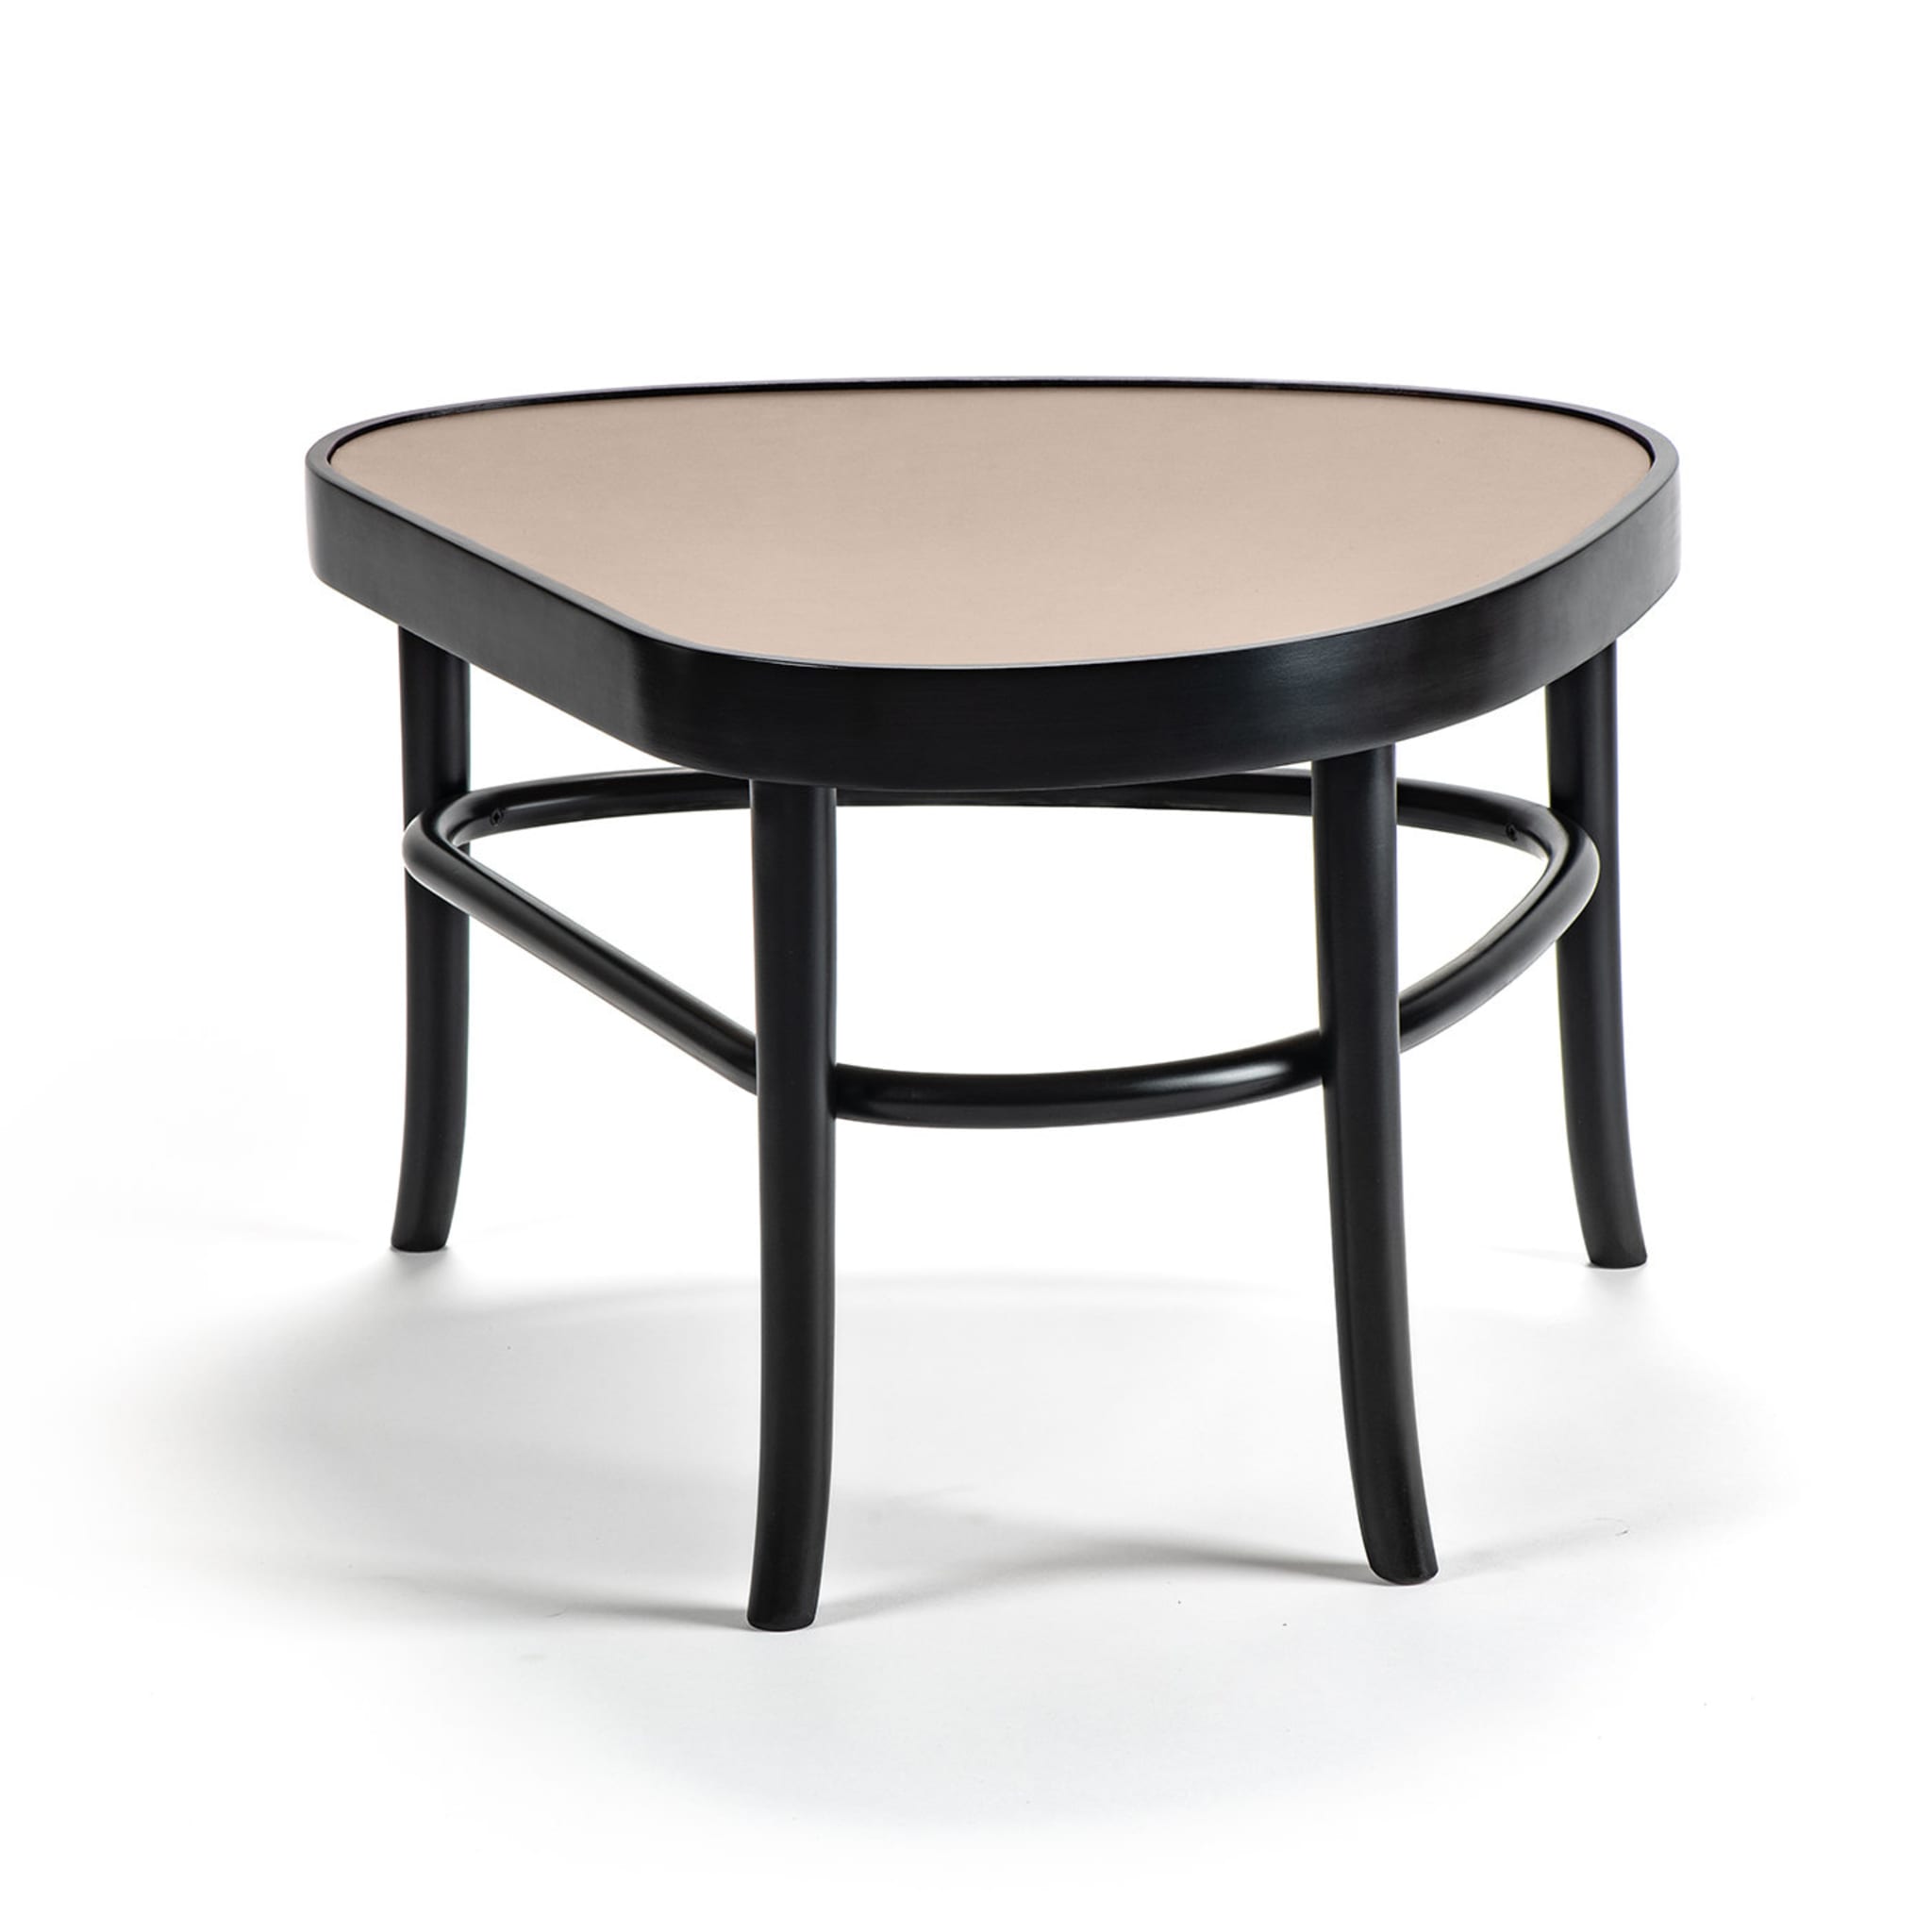 Small Peers Coffee Table by Front - Alternative view 1